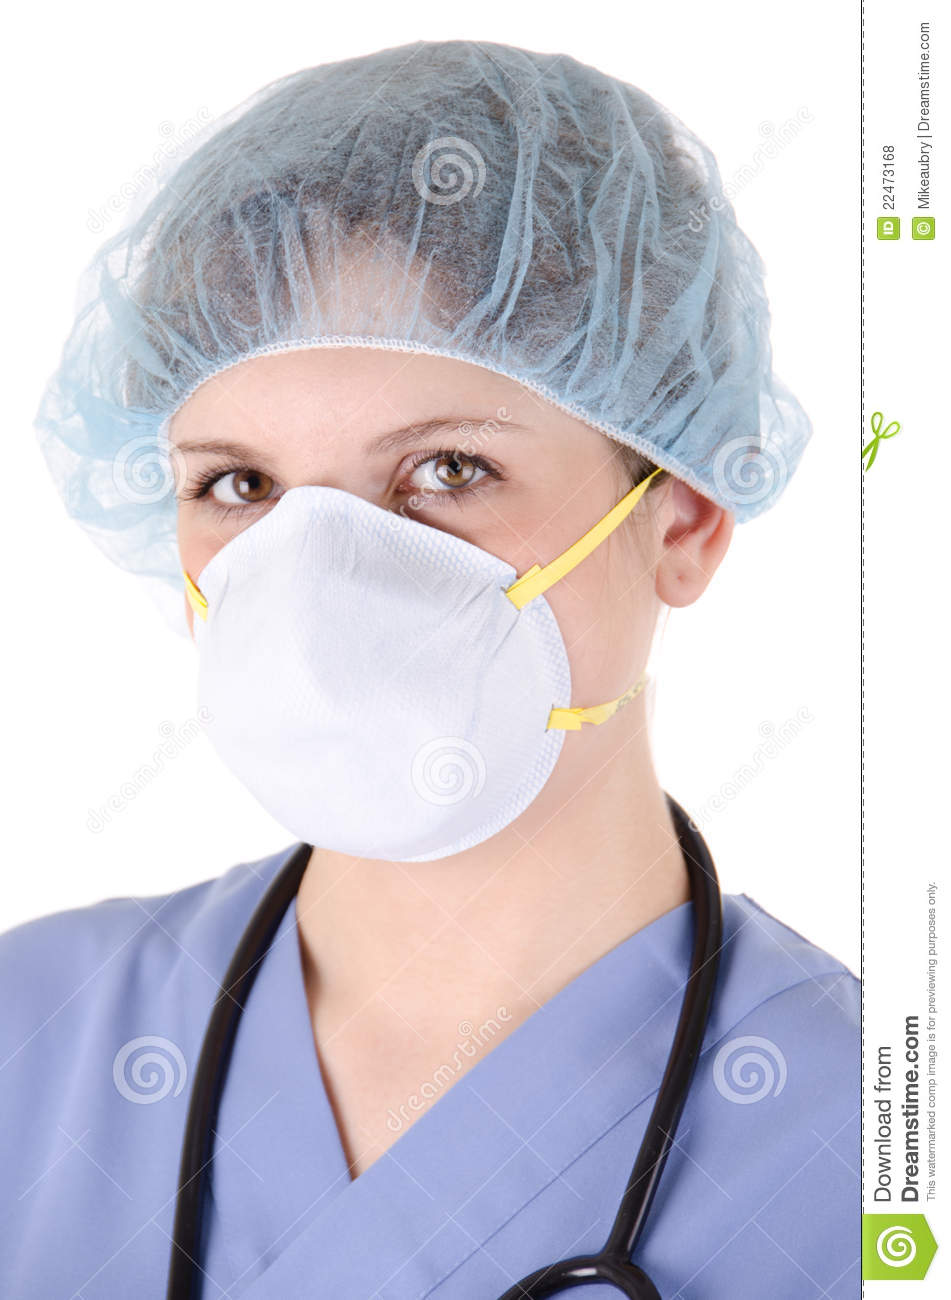 Young Nurse With Mask Royalty Free Stock Photos   Image  22473168